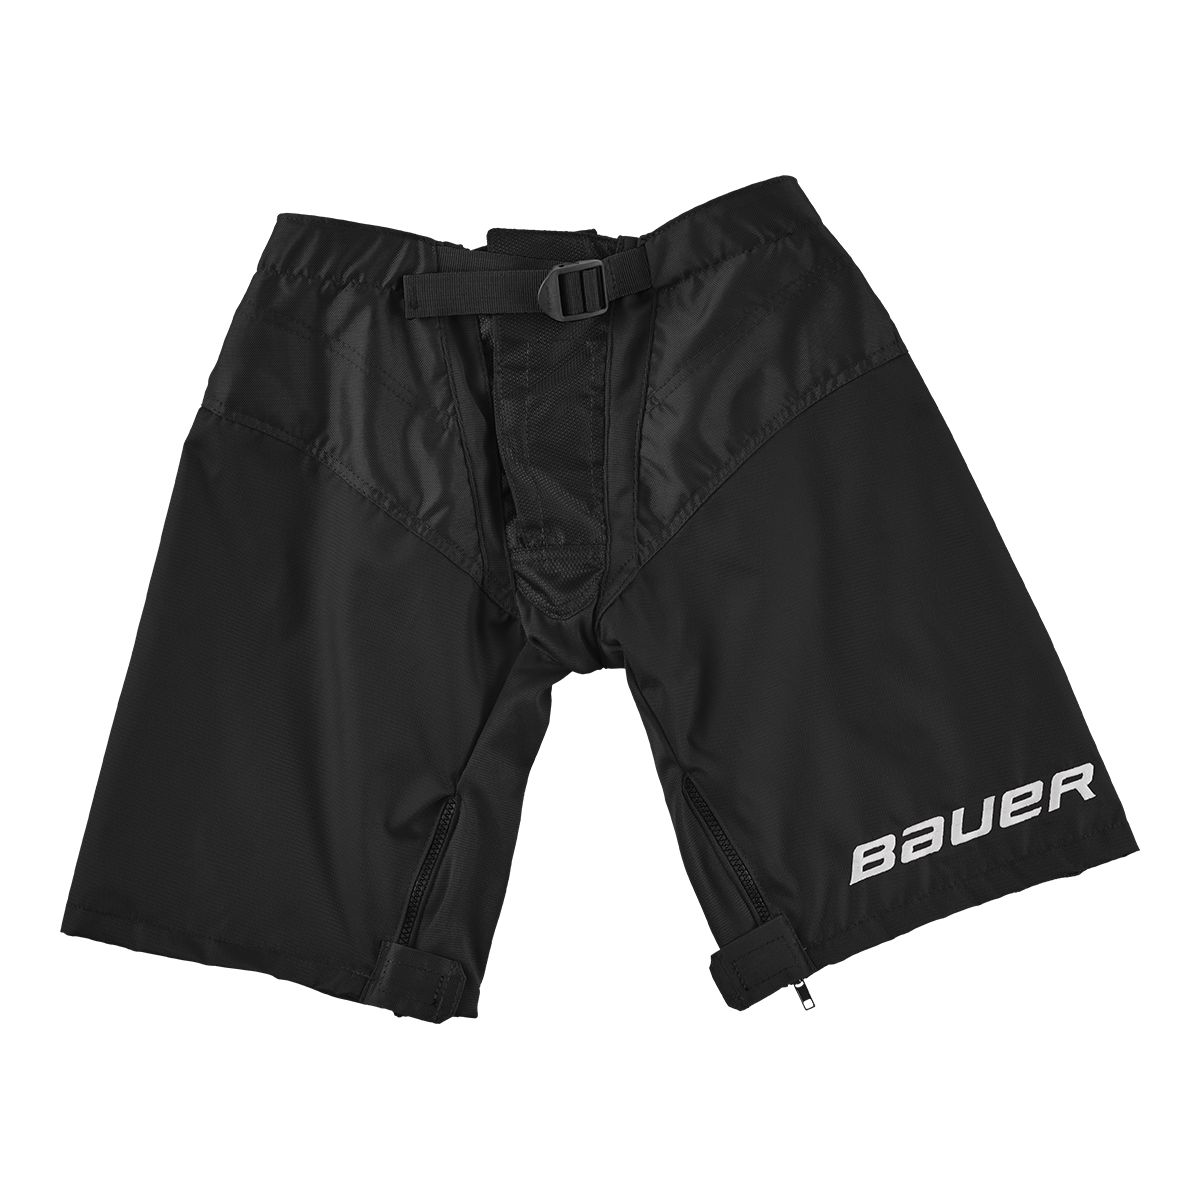 Image of Bauer Junior Hockey Pant Shell